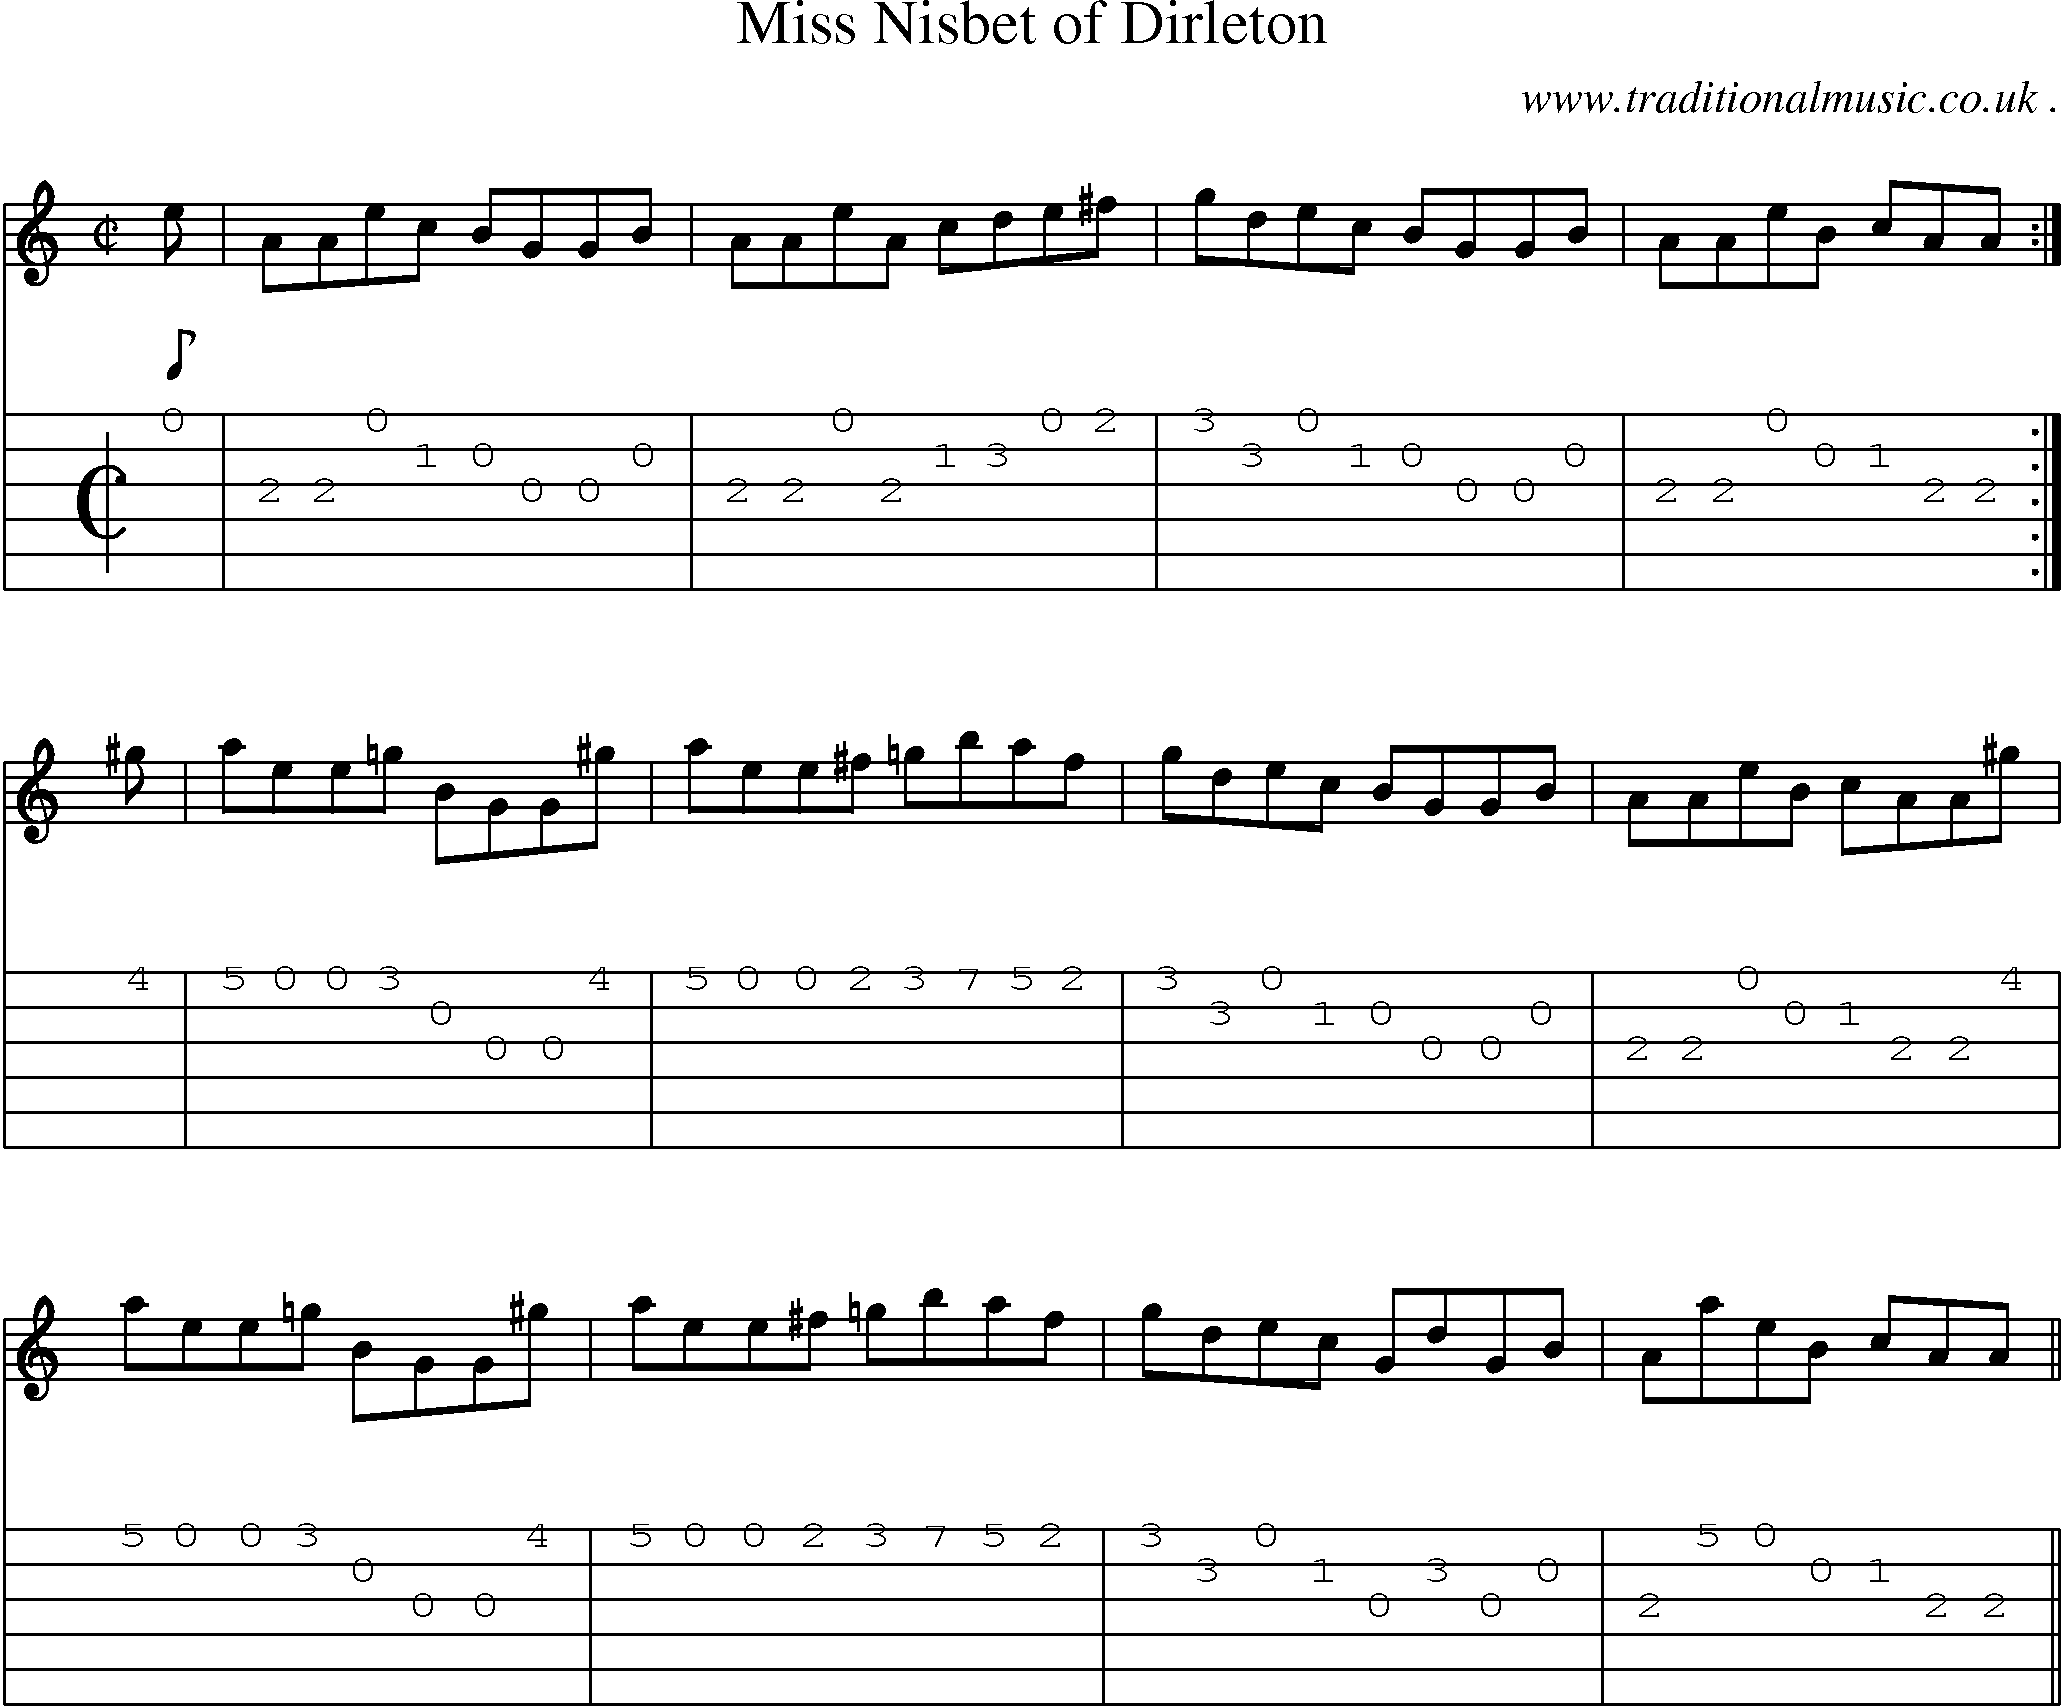 Sheet-music  score, Chords and Guitar Tabs for Miss Nisbet Of Dirleton